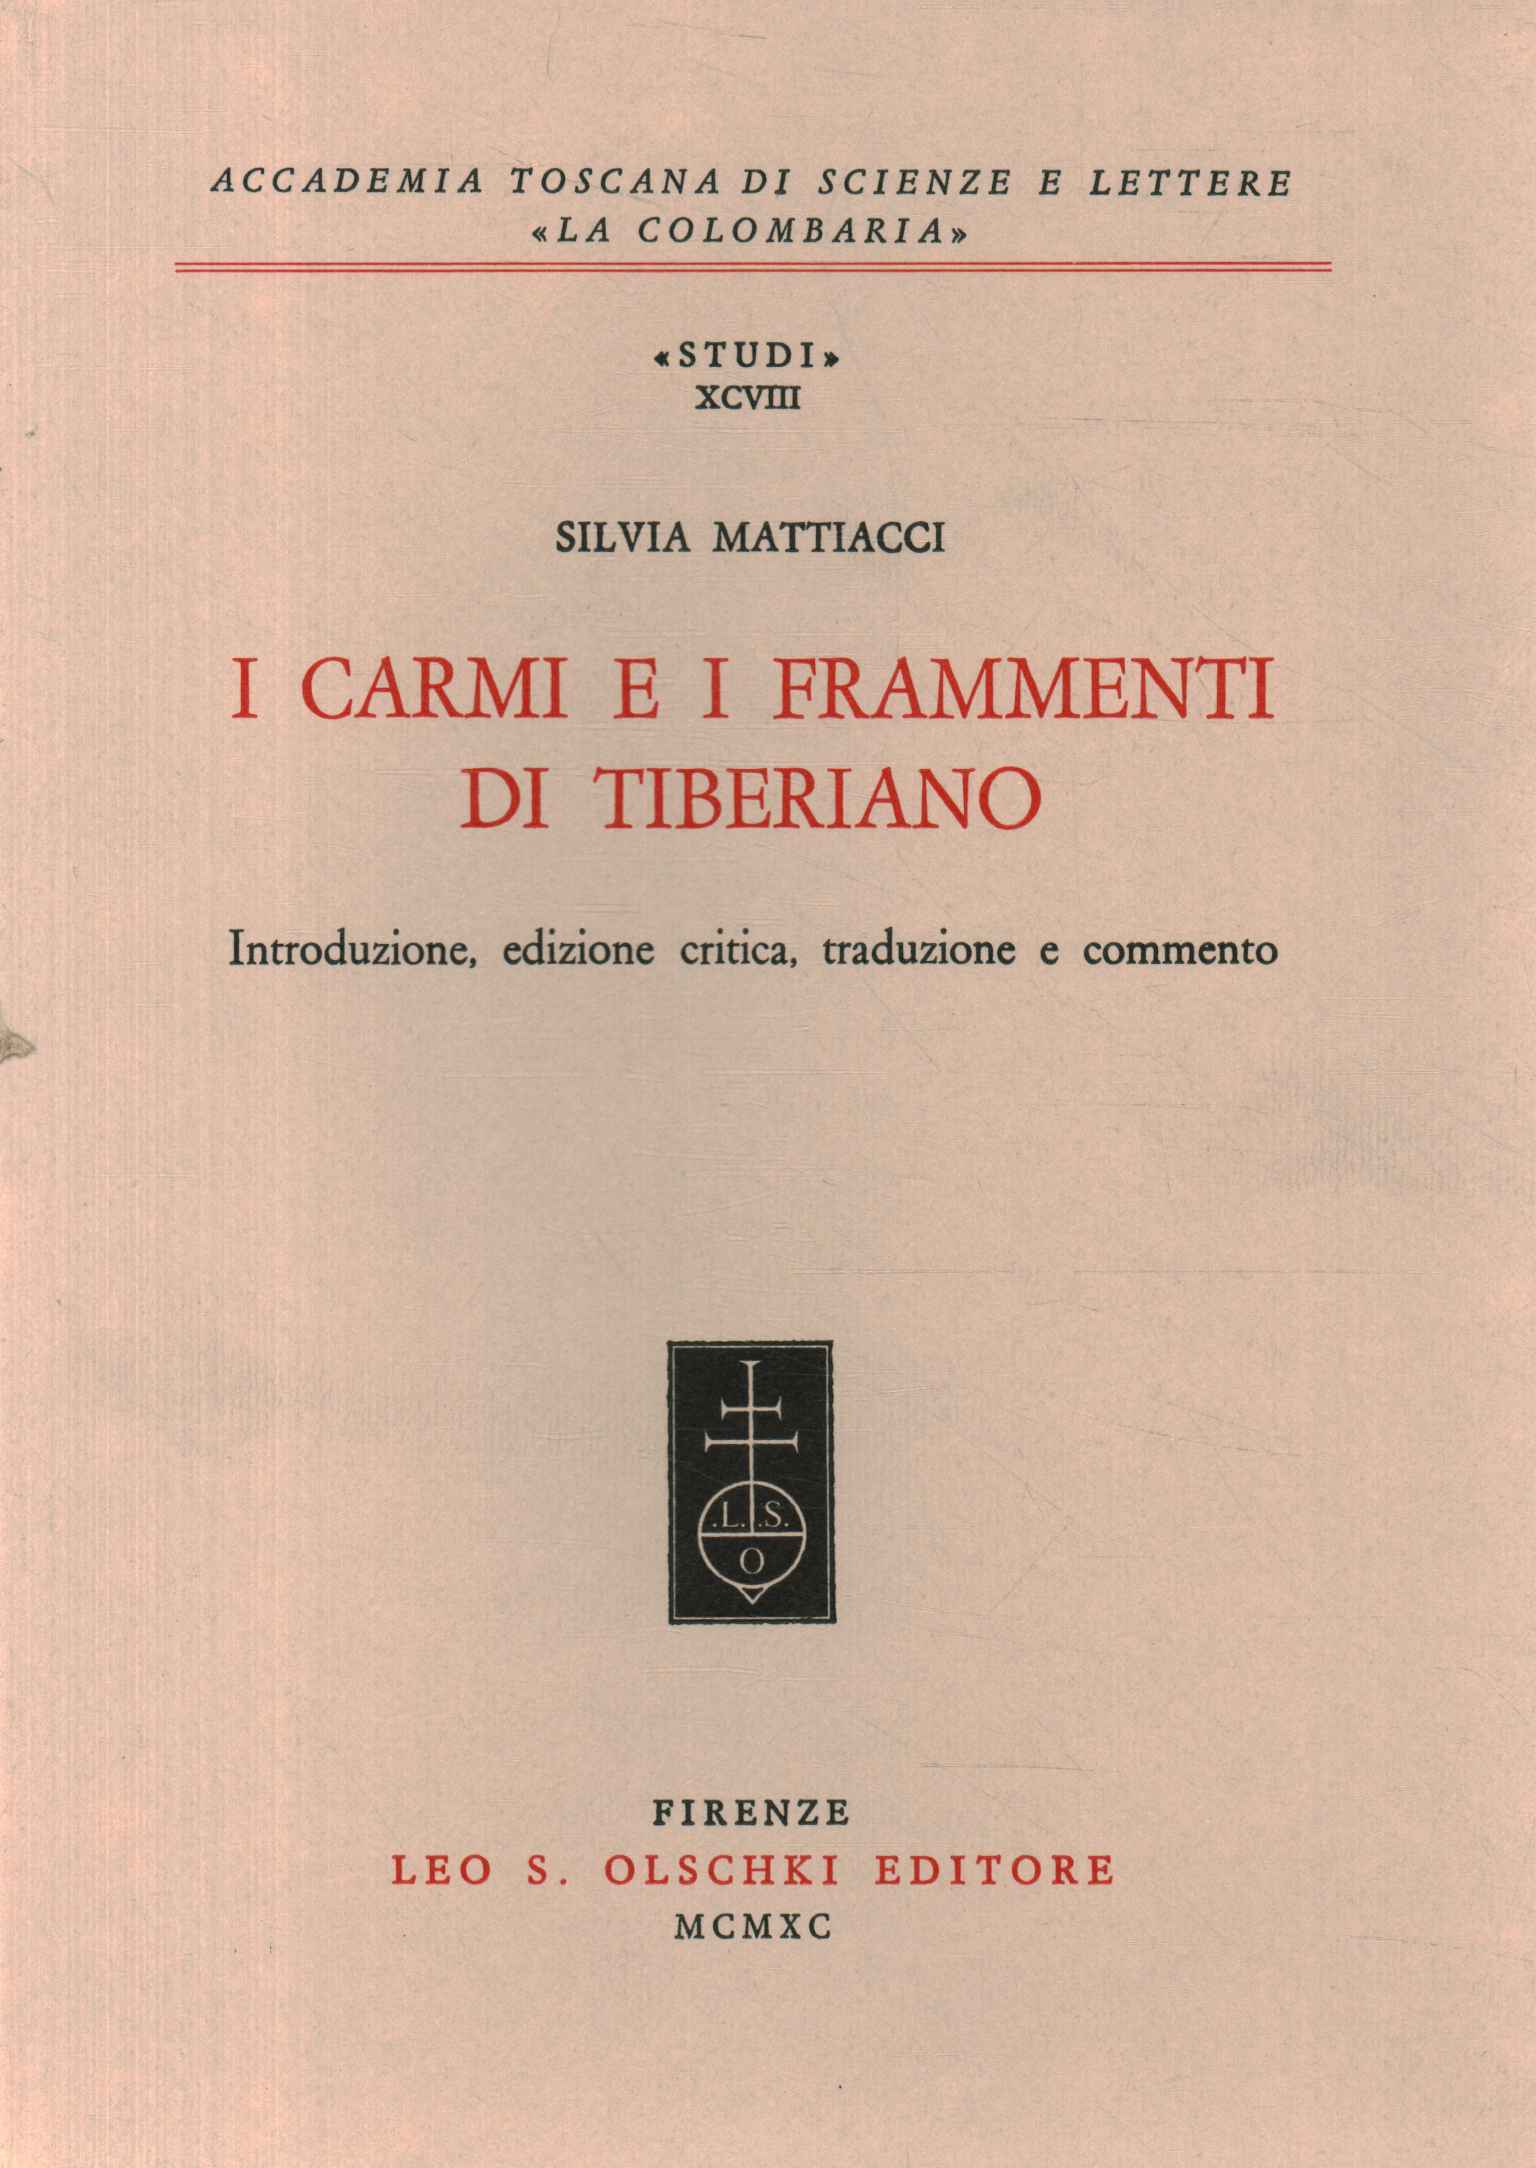 The poems and fragments of Tiberiano